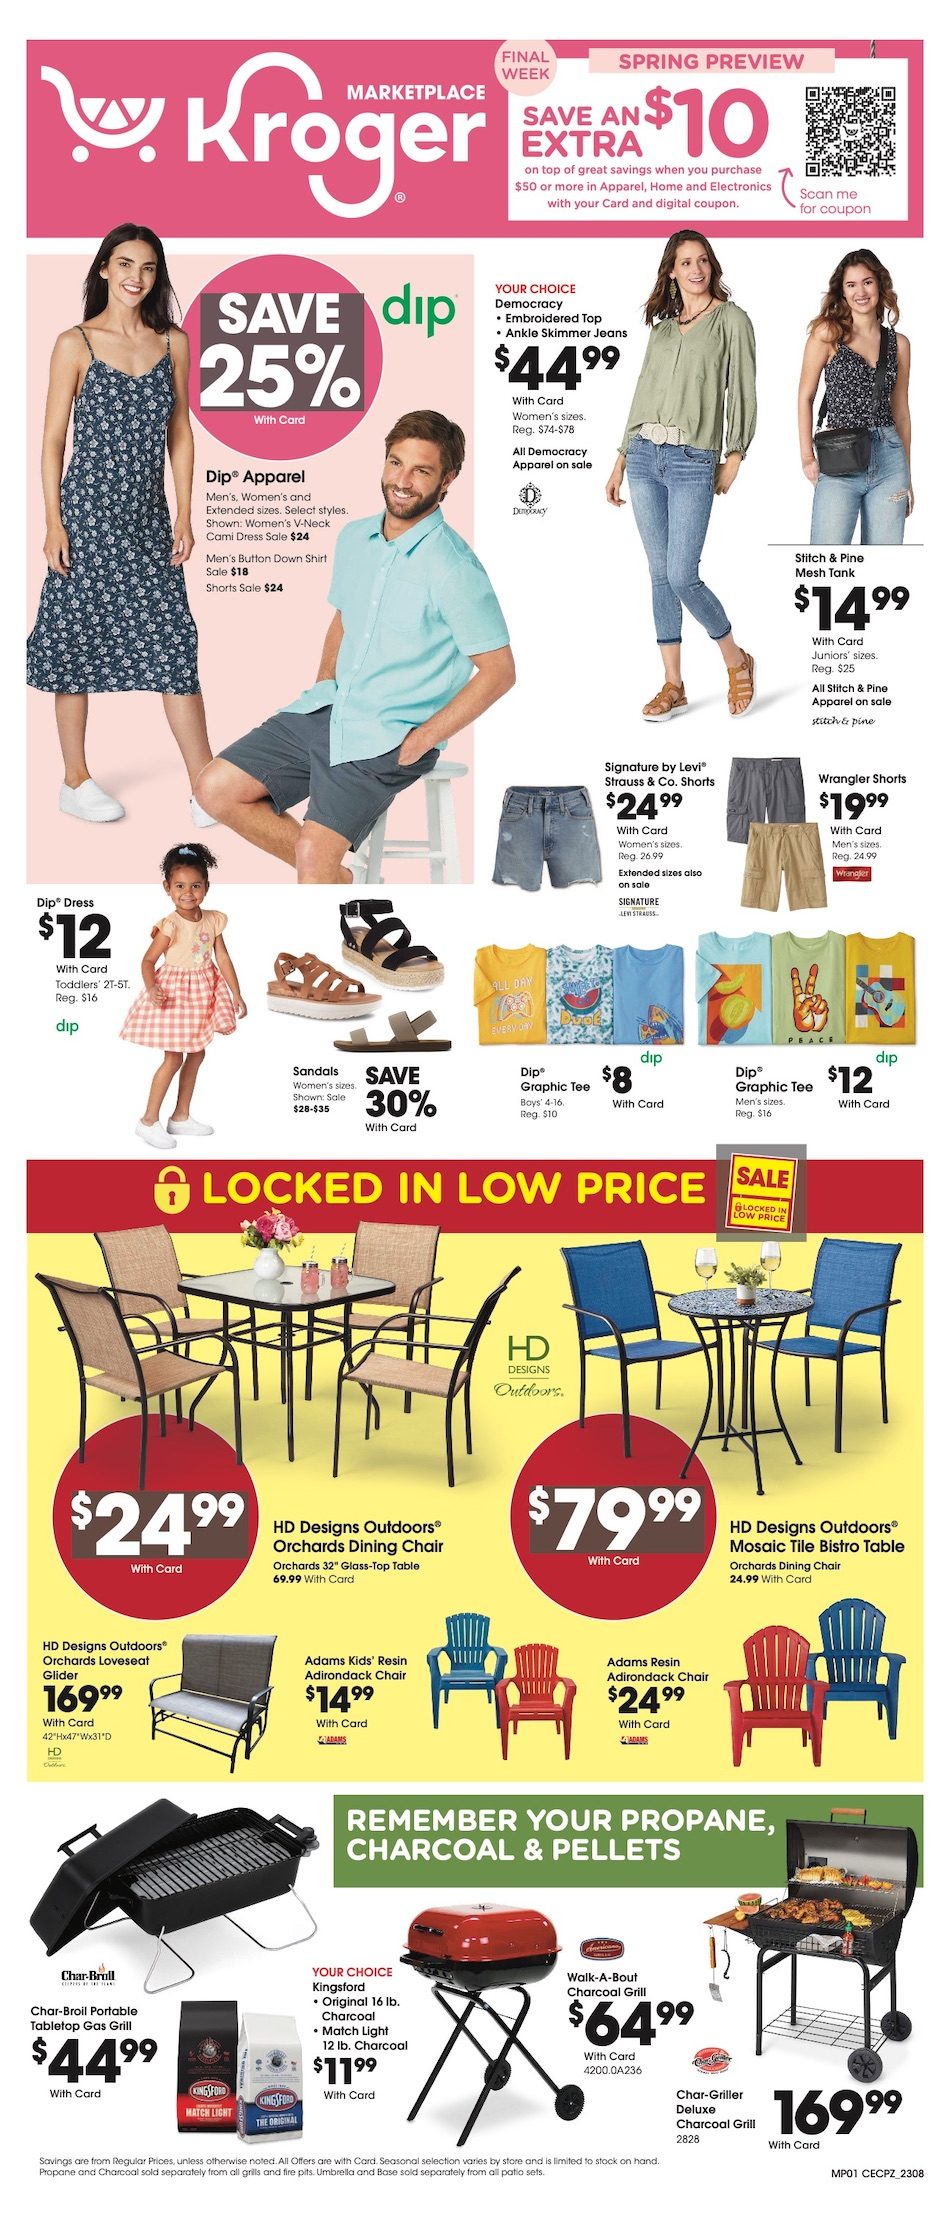 Kroger Ad Merchandise 22nd – 28th March 2023 Page 1